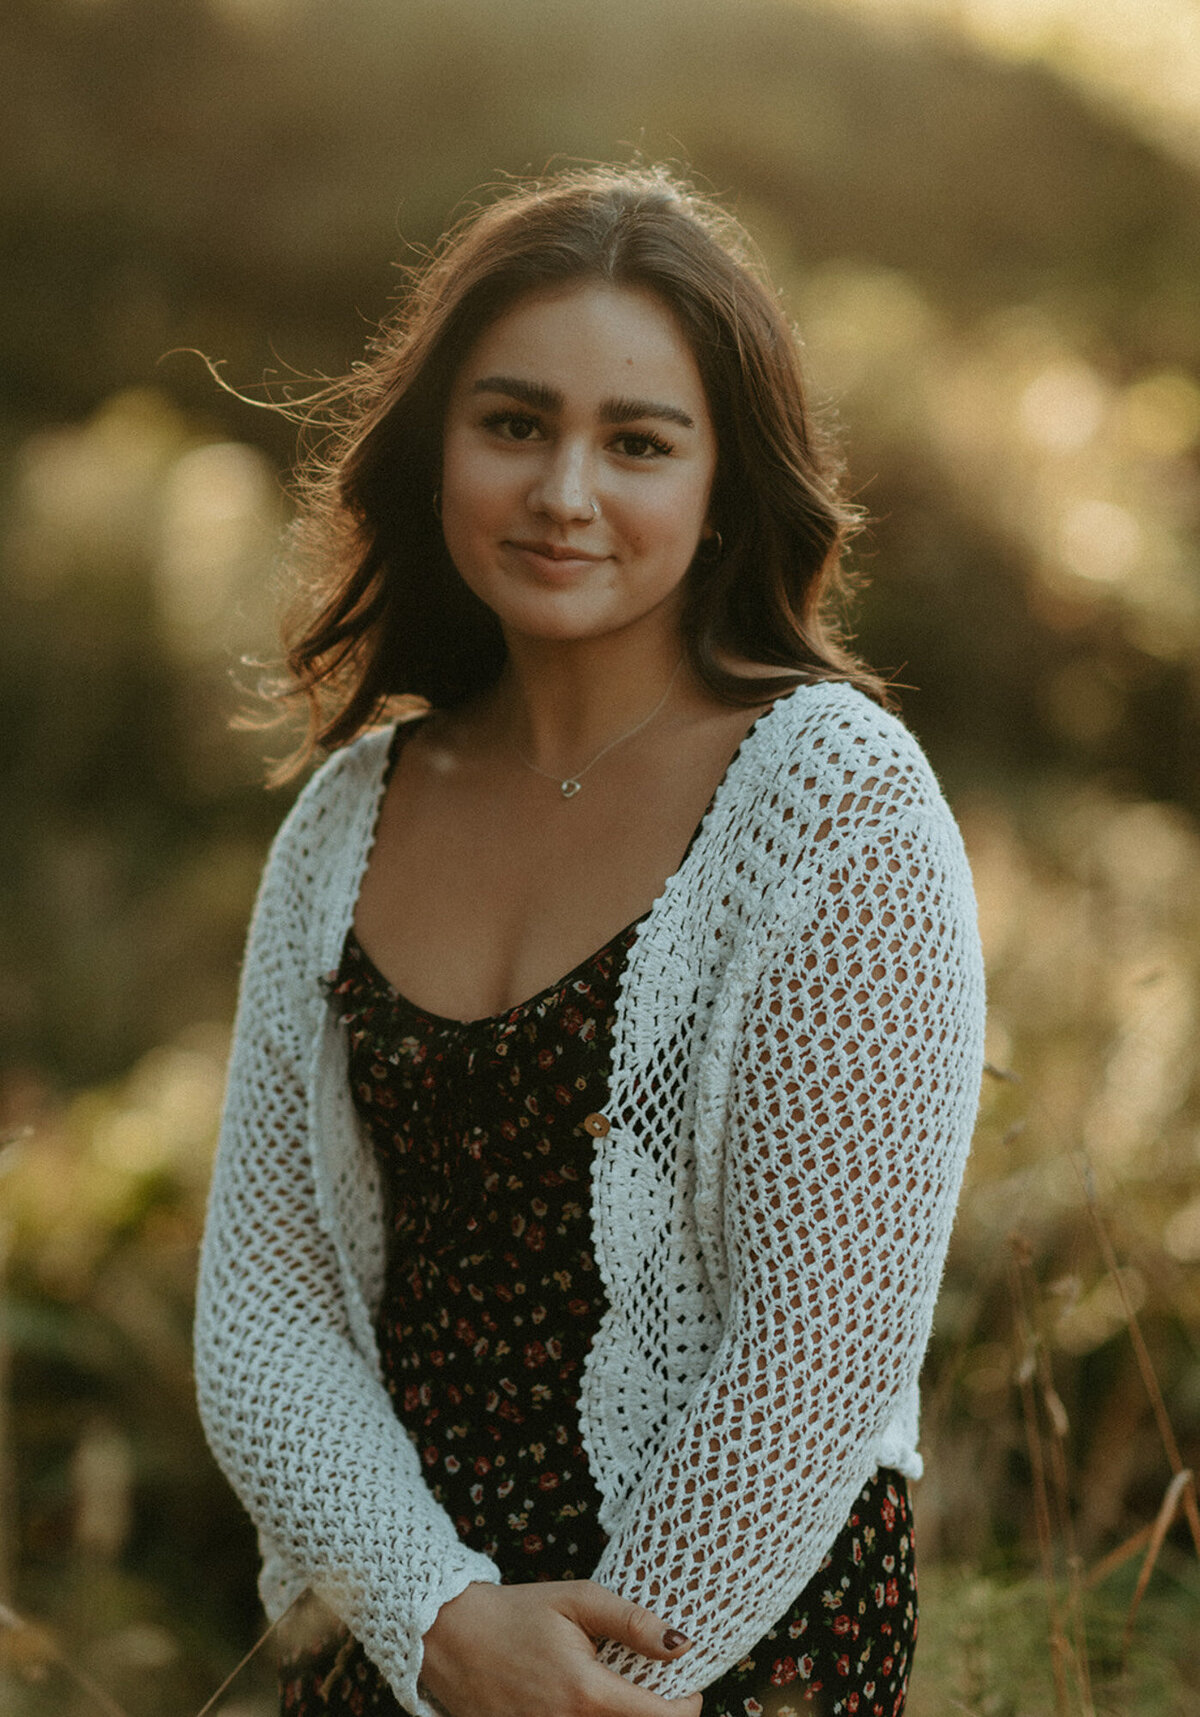 girl wearing floral dress and white sweater